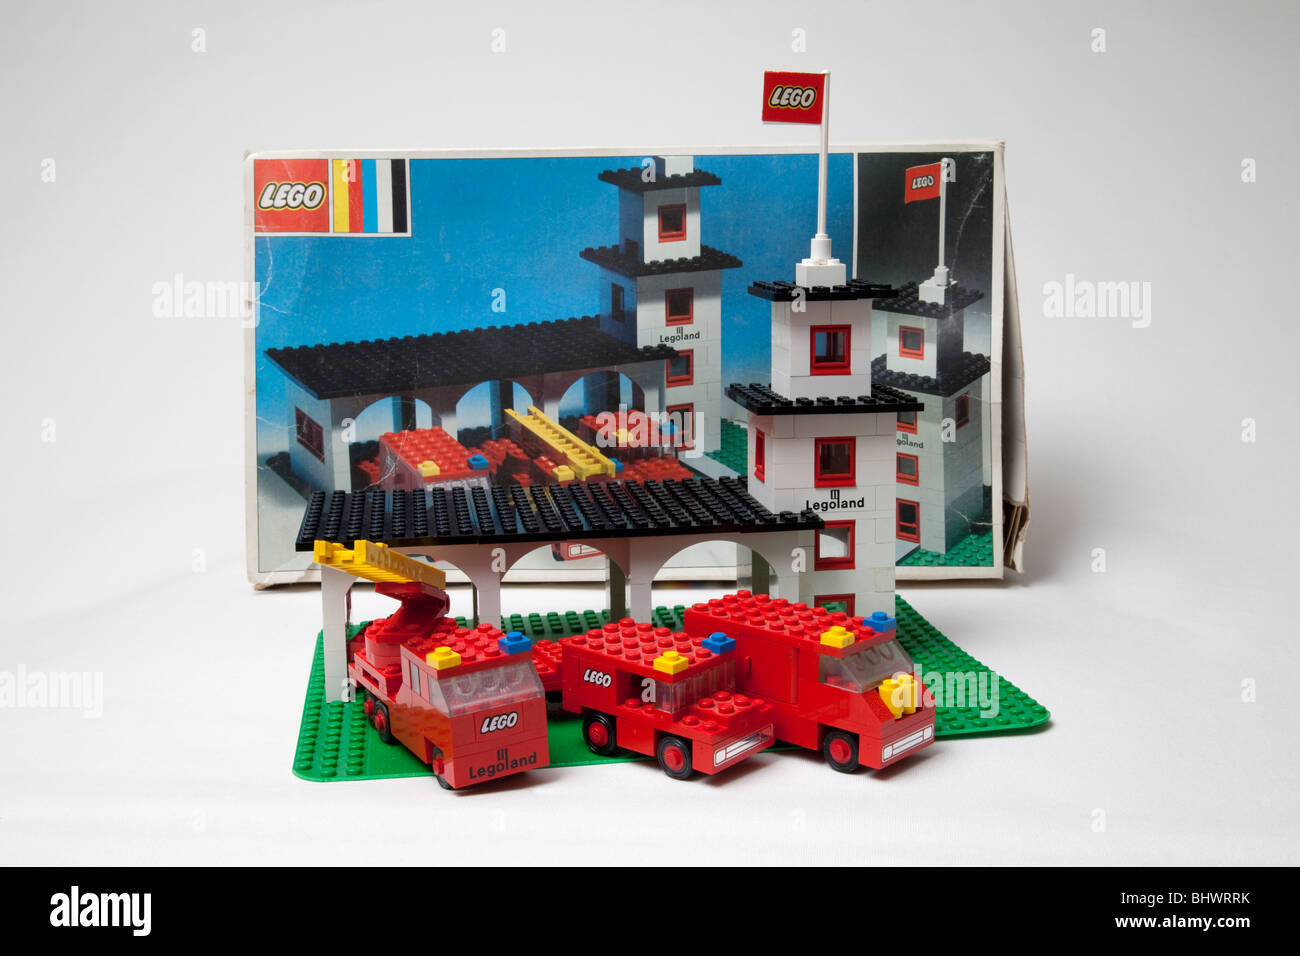 Old lego toy set fire brigade station Stock Photo